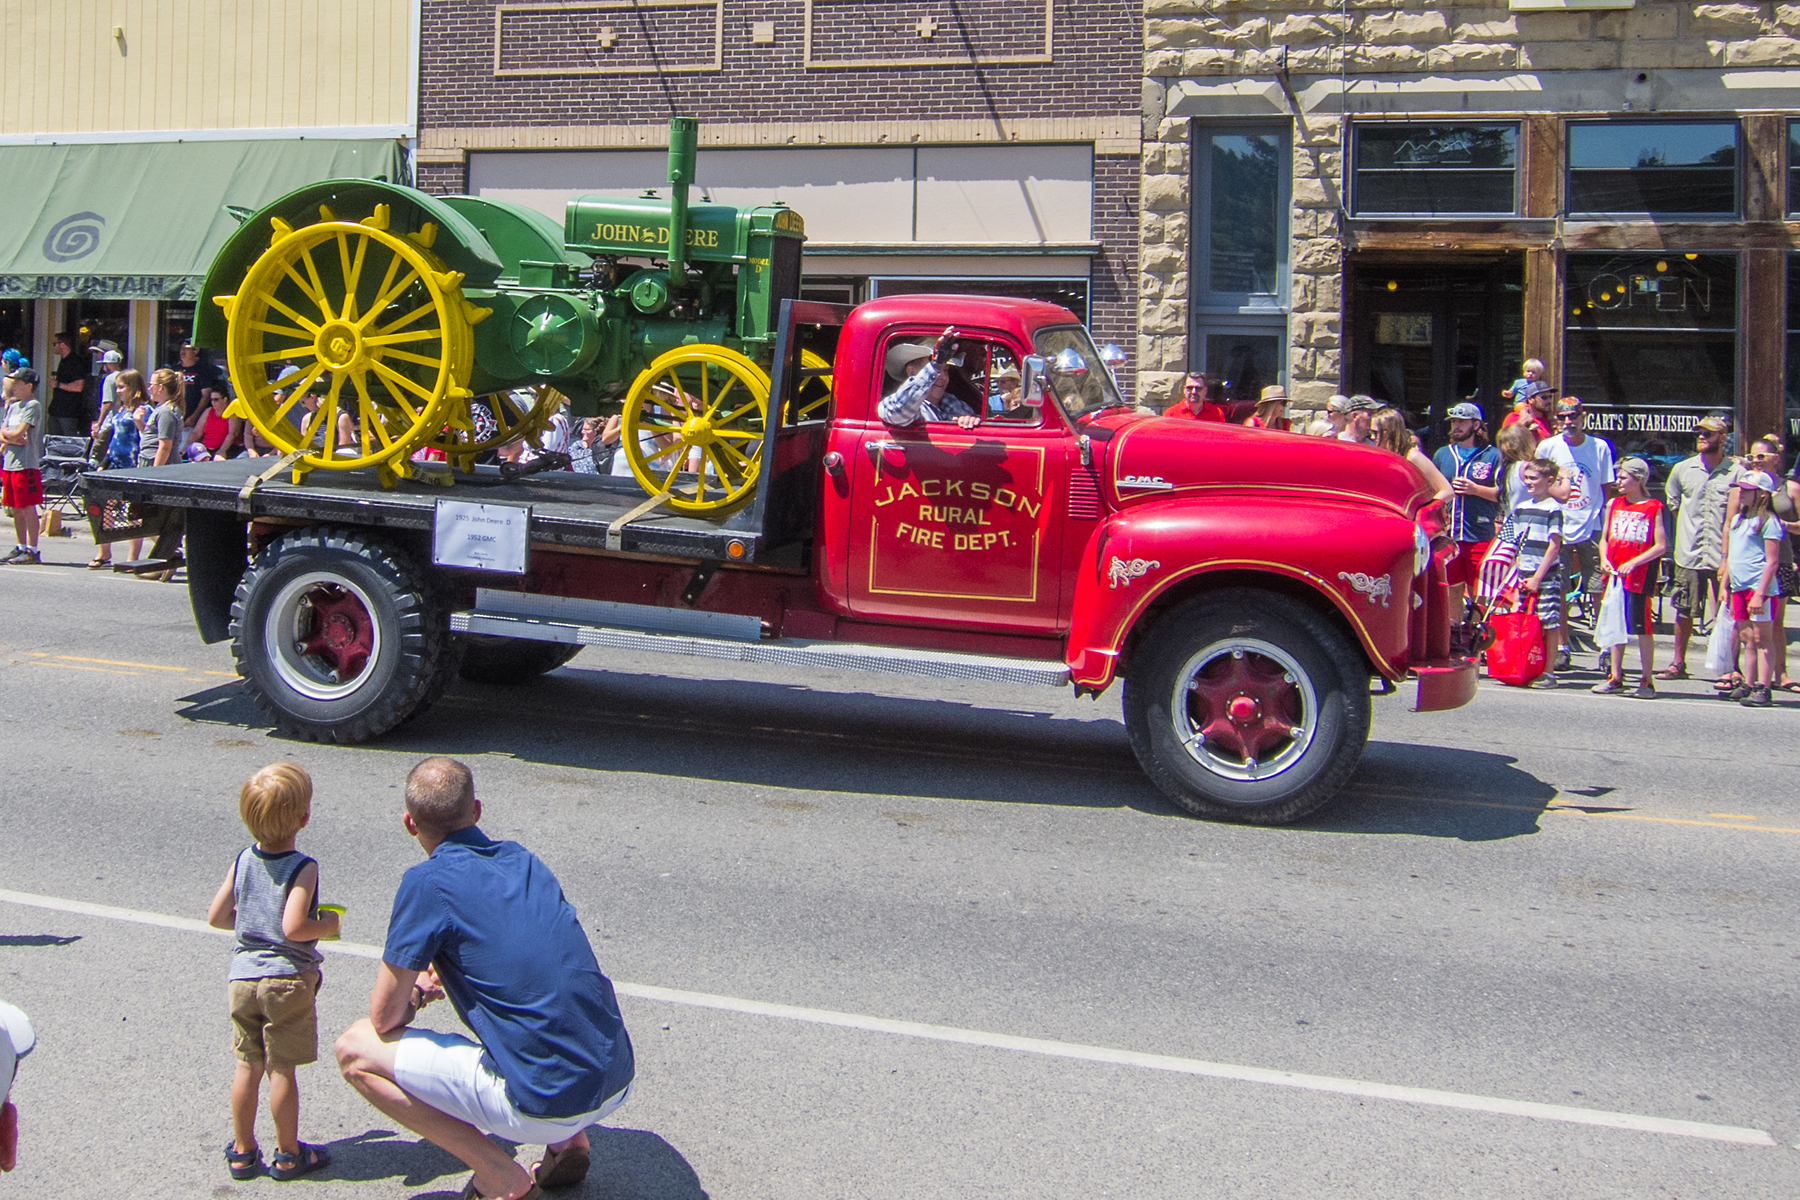 4th of July rodeo parade, Red Lodge, MT, 2021.  1925 John Deere tractor on the back of the truck.  Click for next photo.